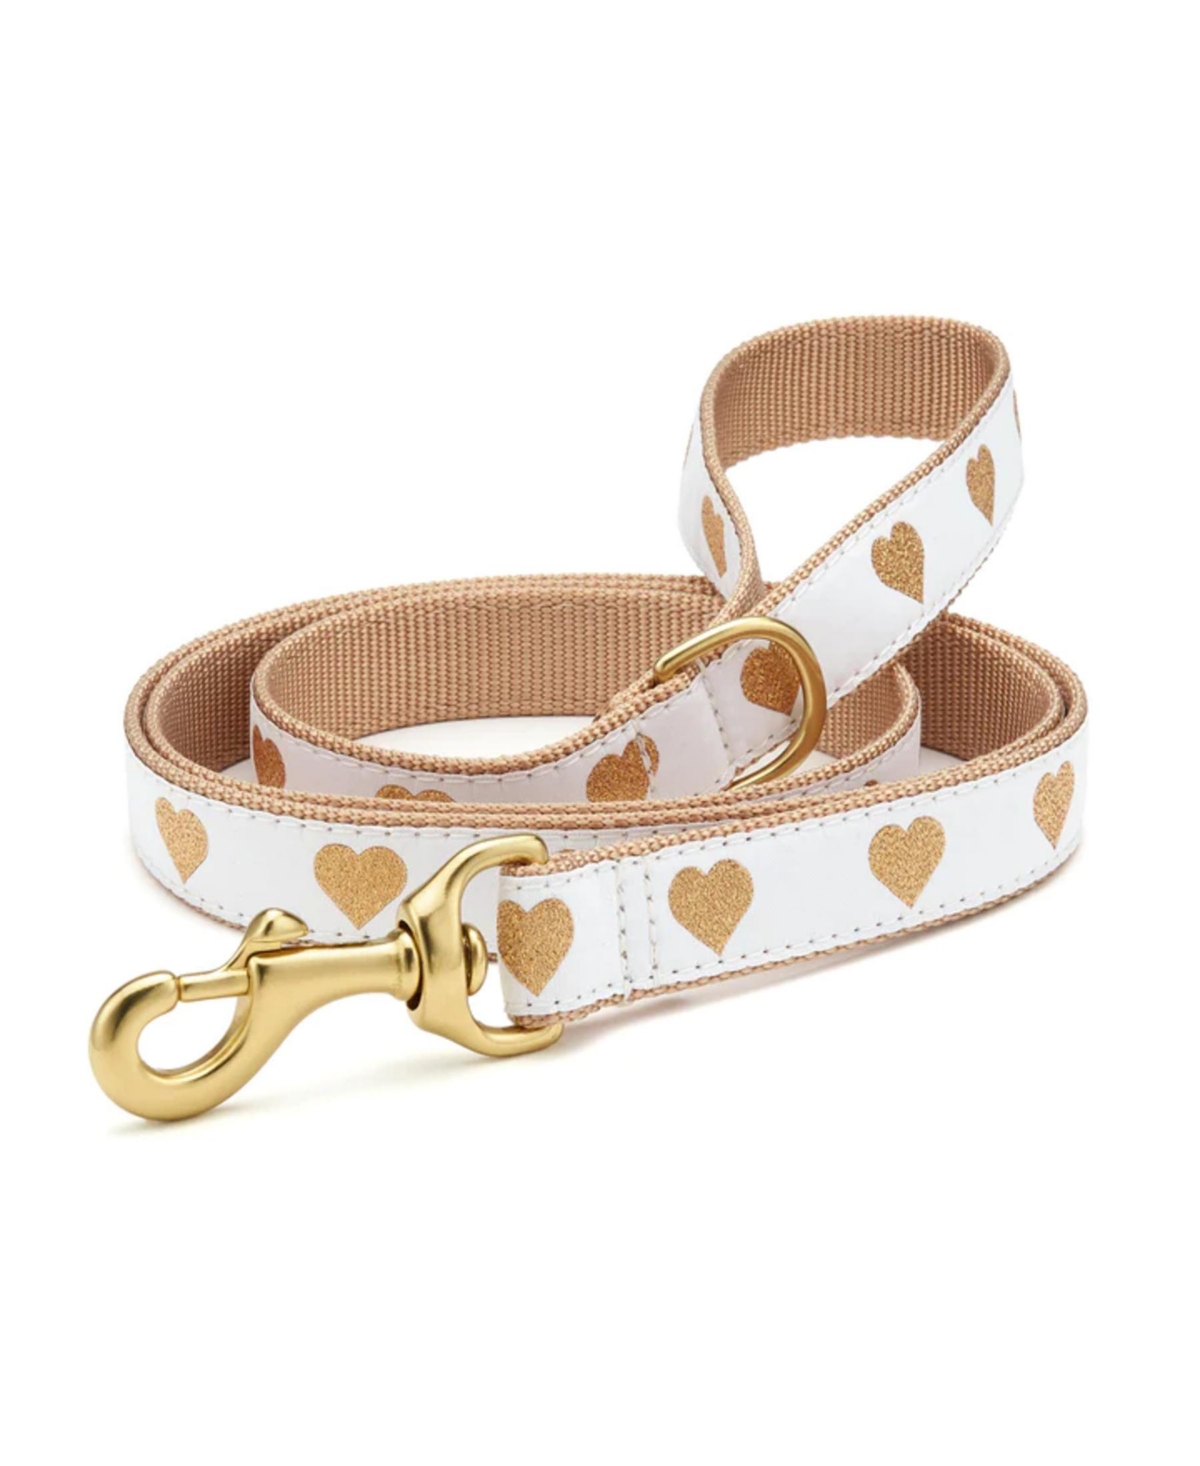 5' Wide Heart of Gold-tone Lead with D-ring - Multi